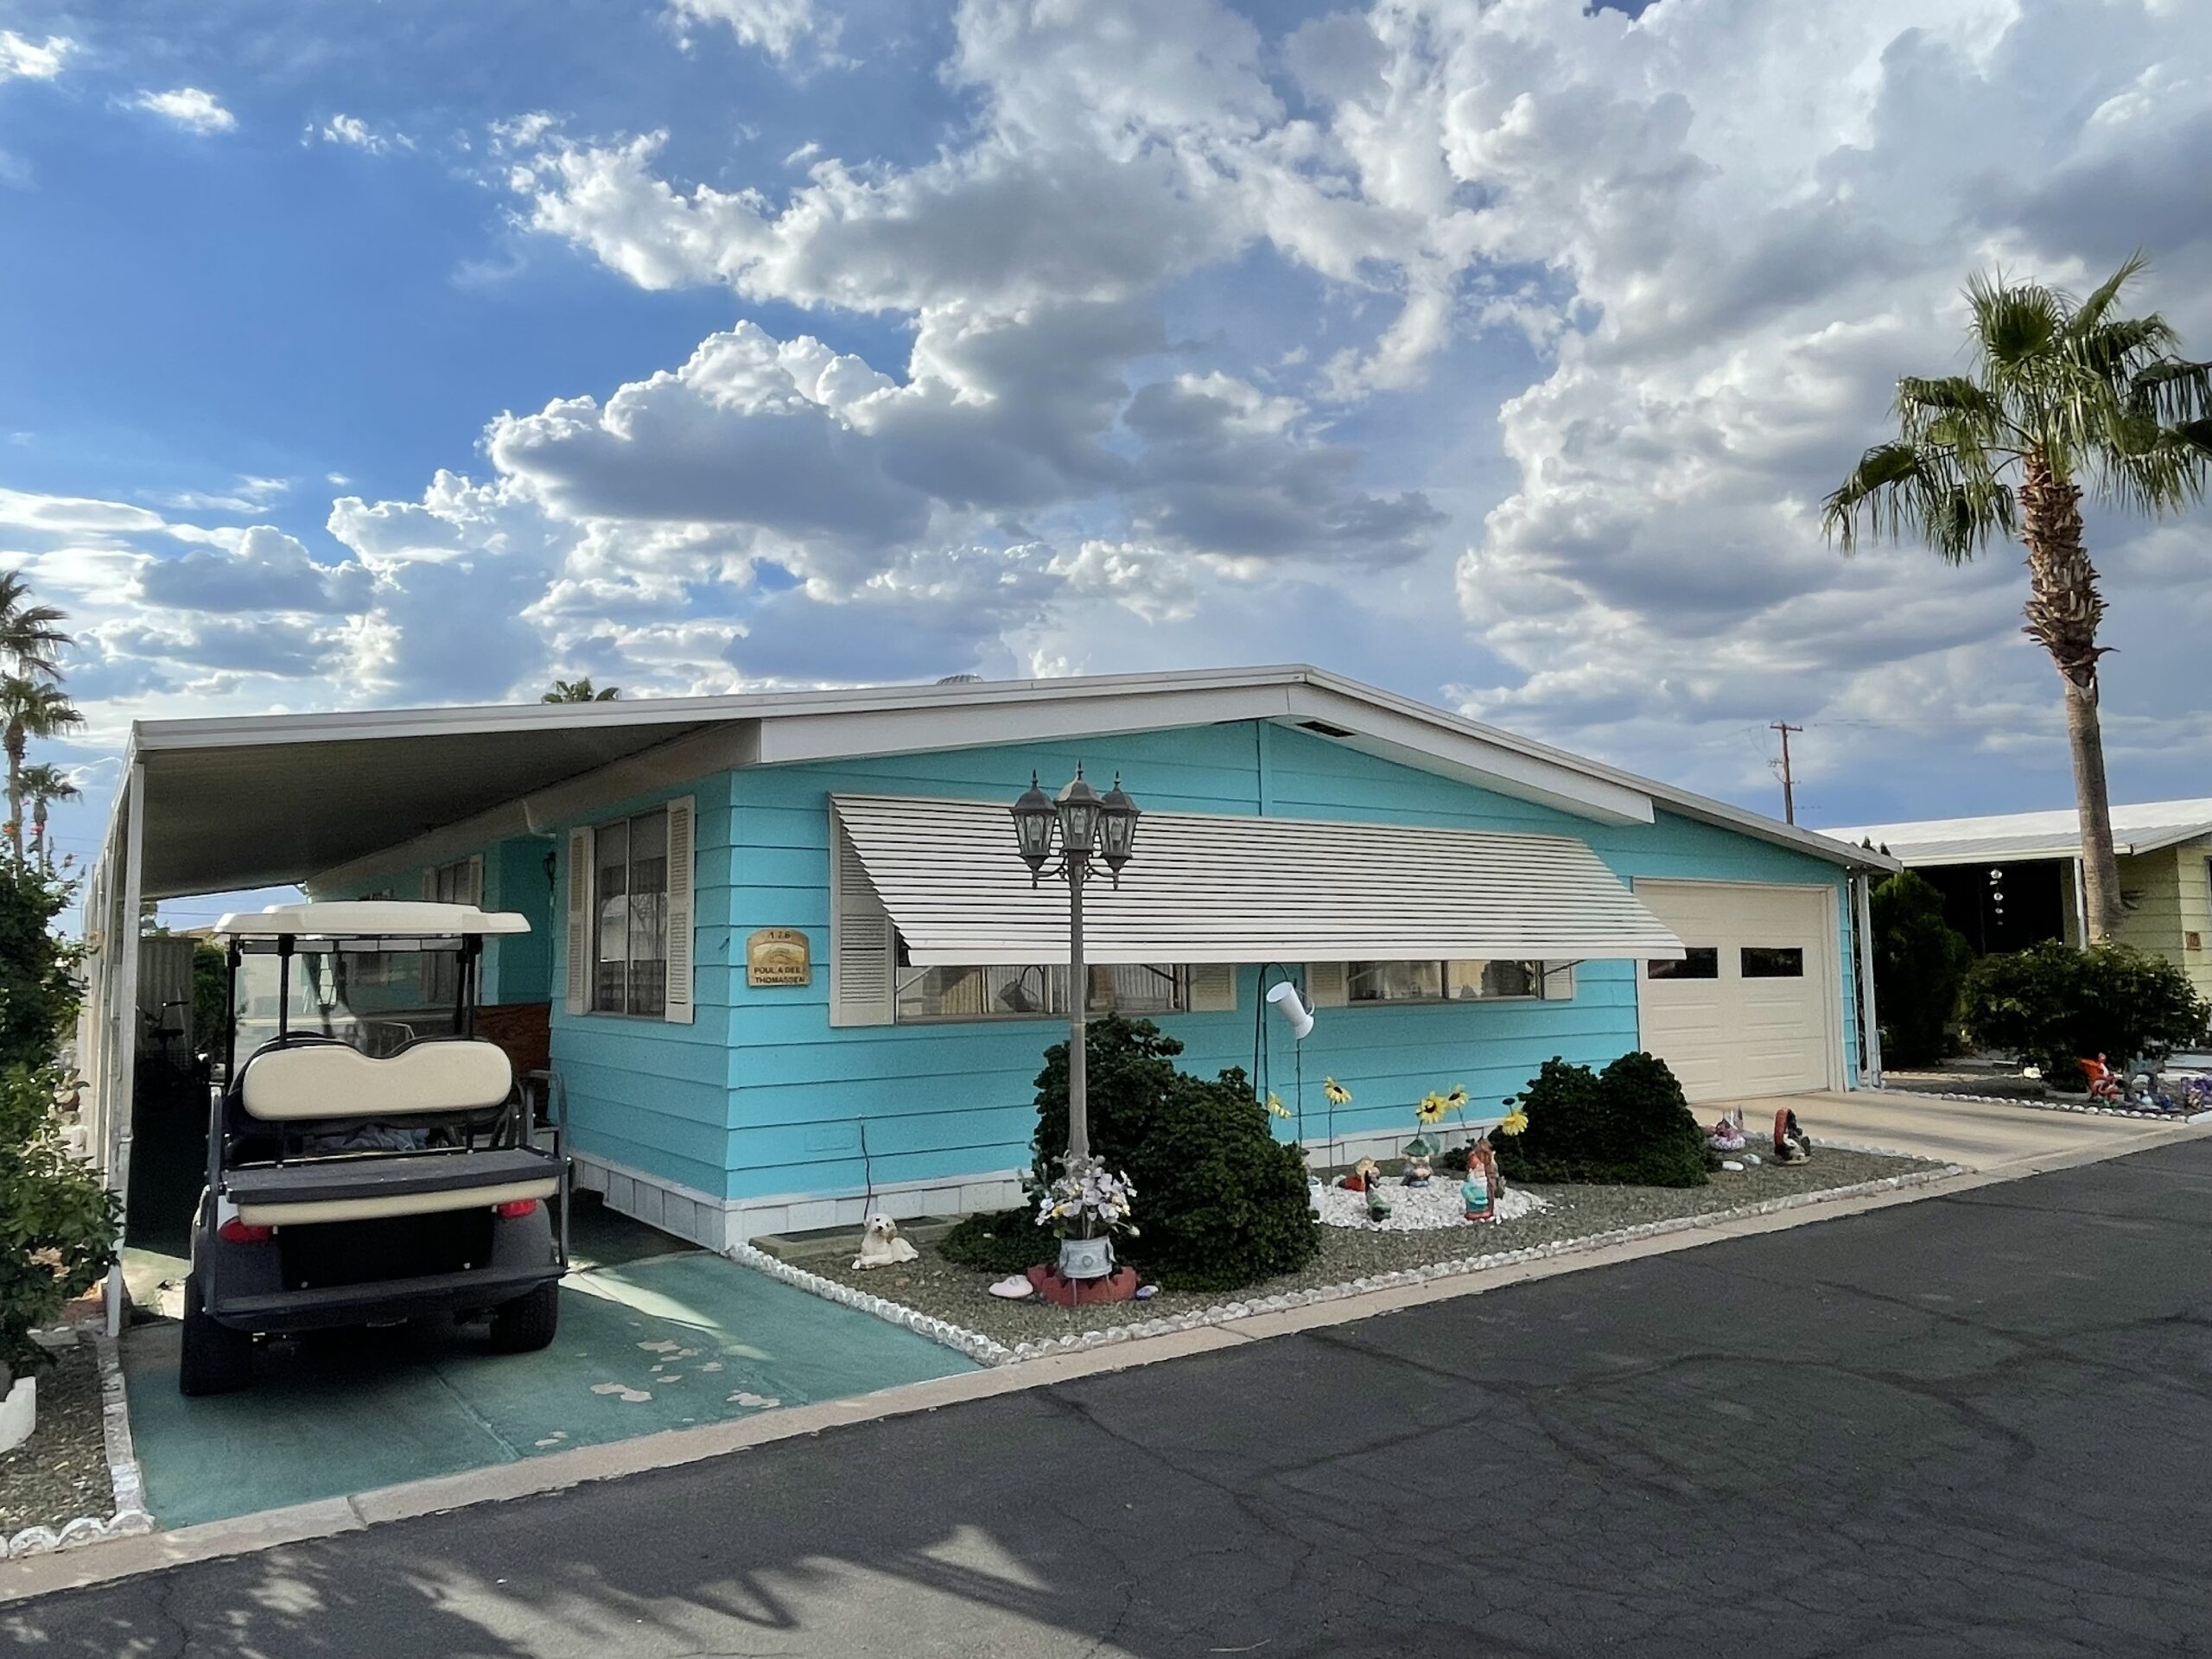 sell your mobile home in mesa